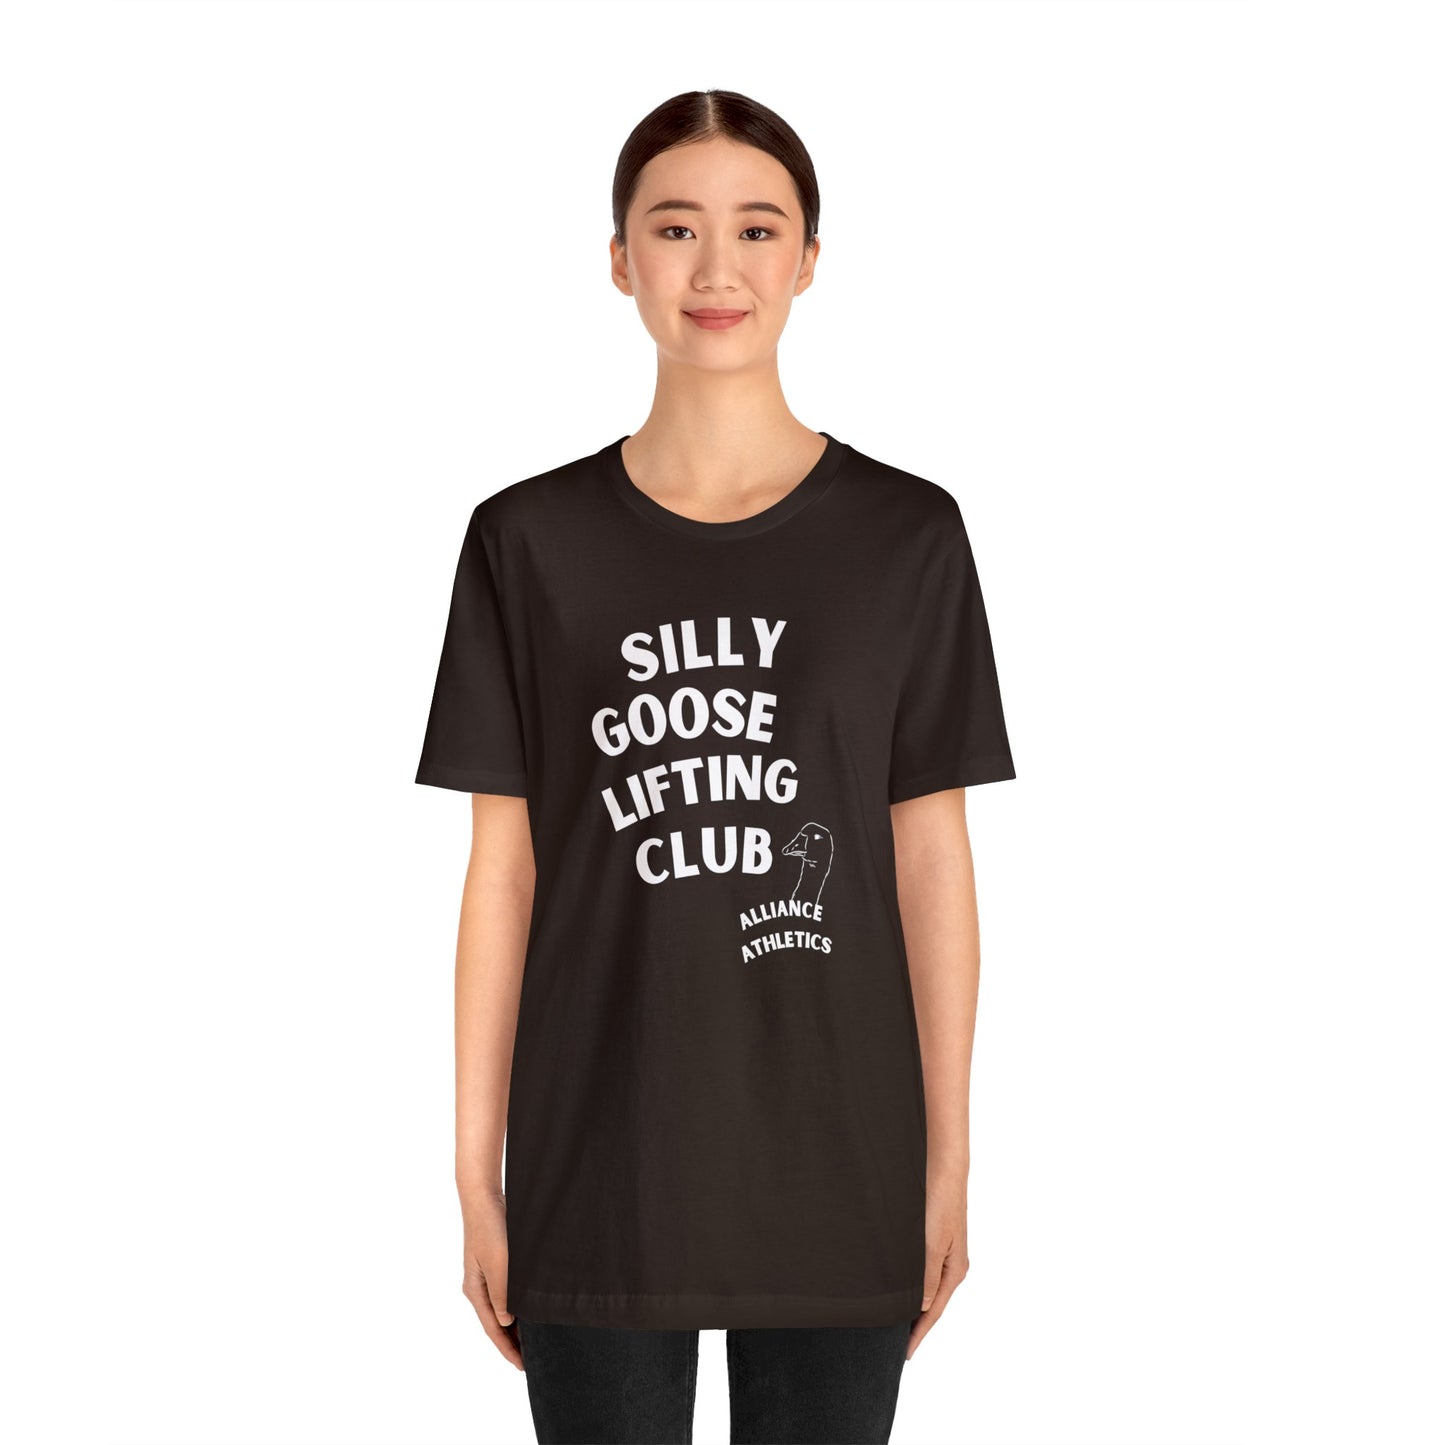 Silly Goose Lifting Club Tee